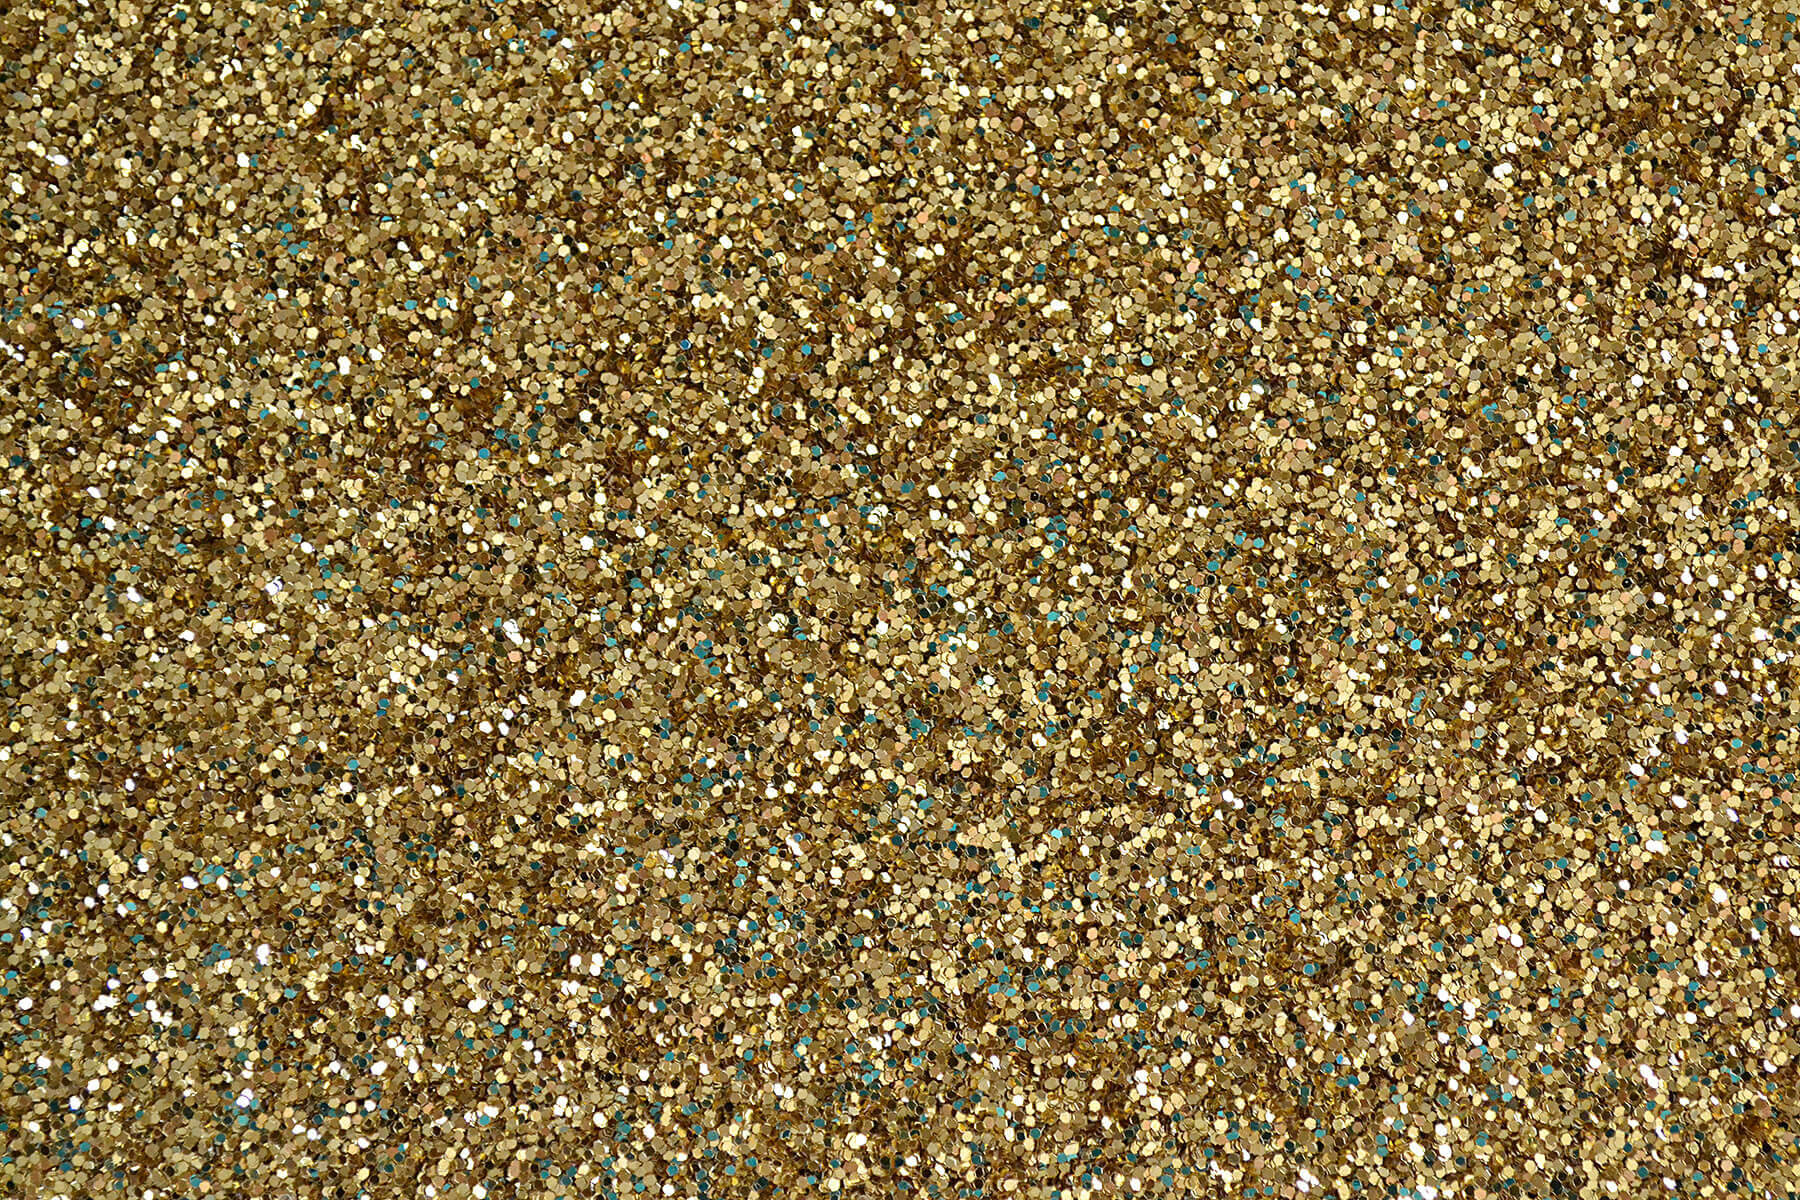 Glittery Freebies for Your Desktop Smart Phone or Crafts 1800x1200